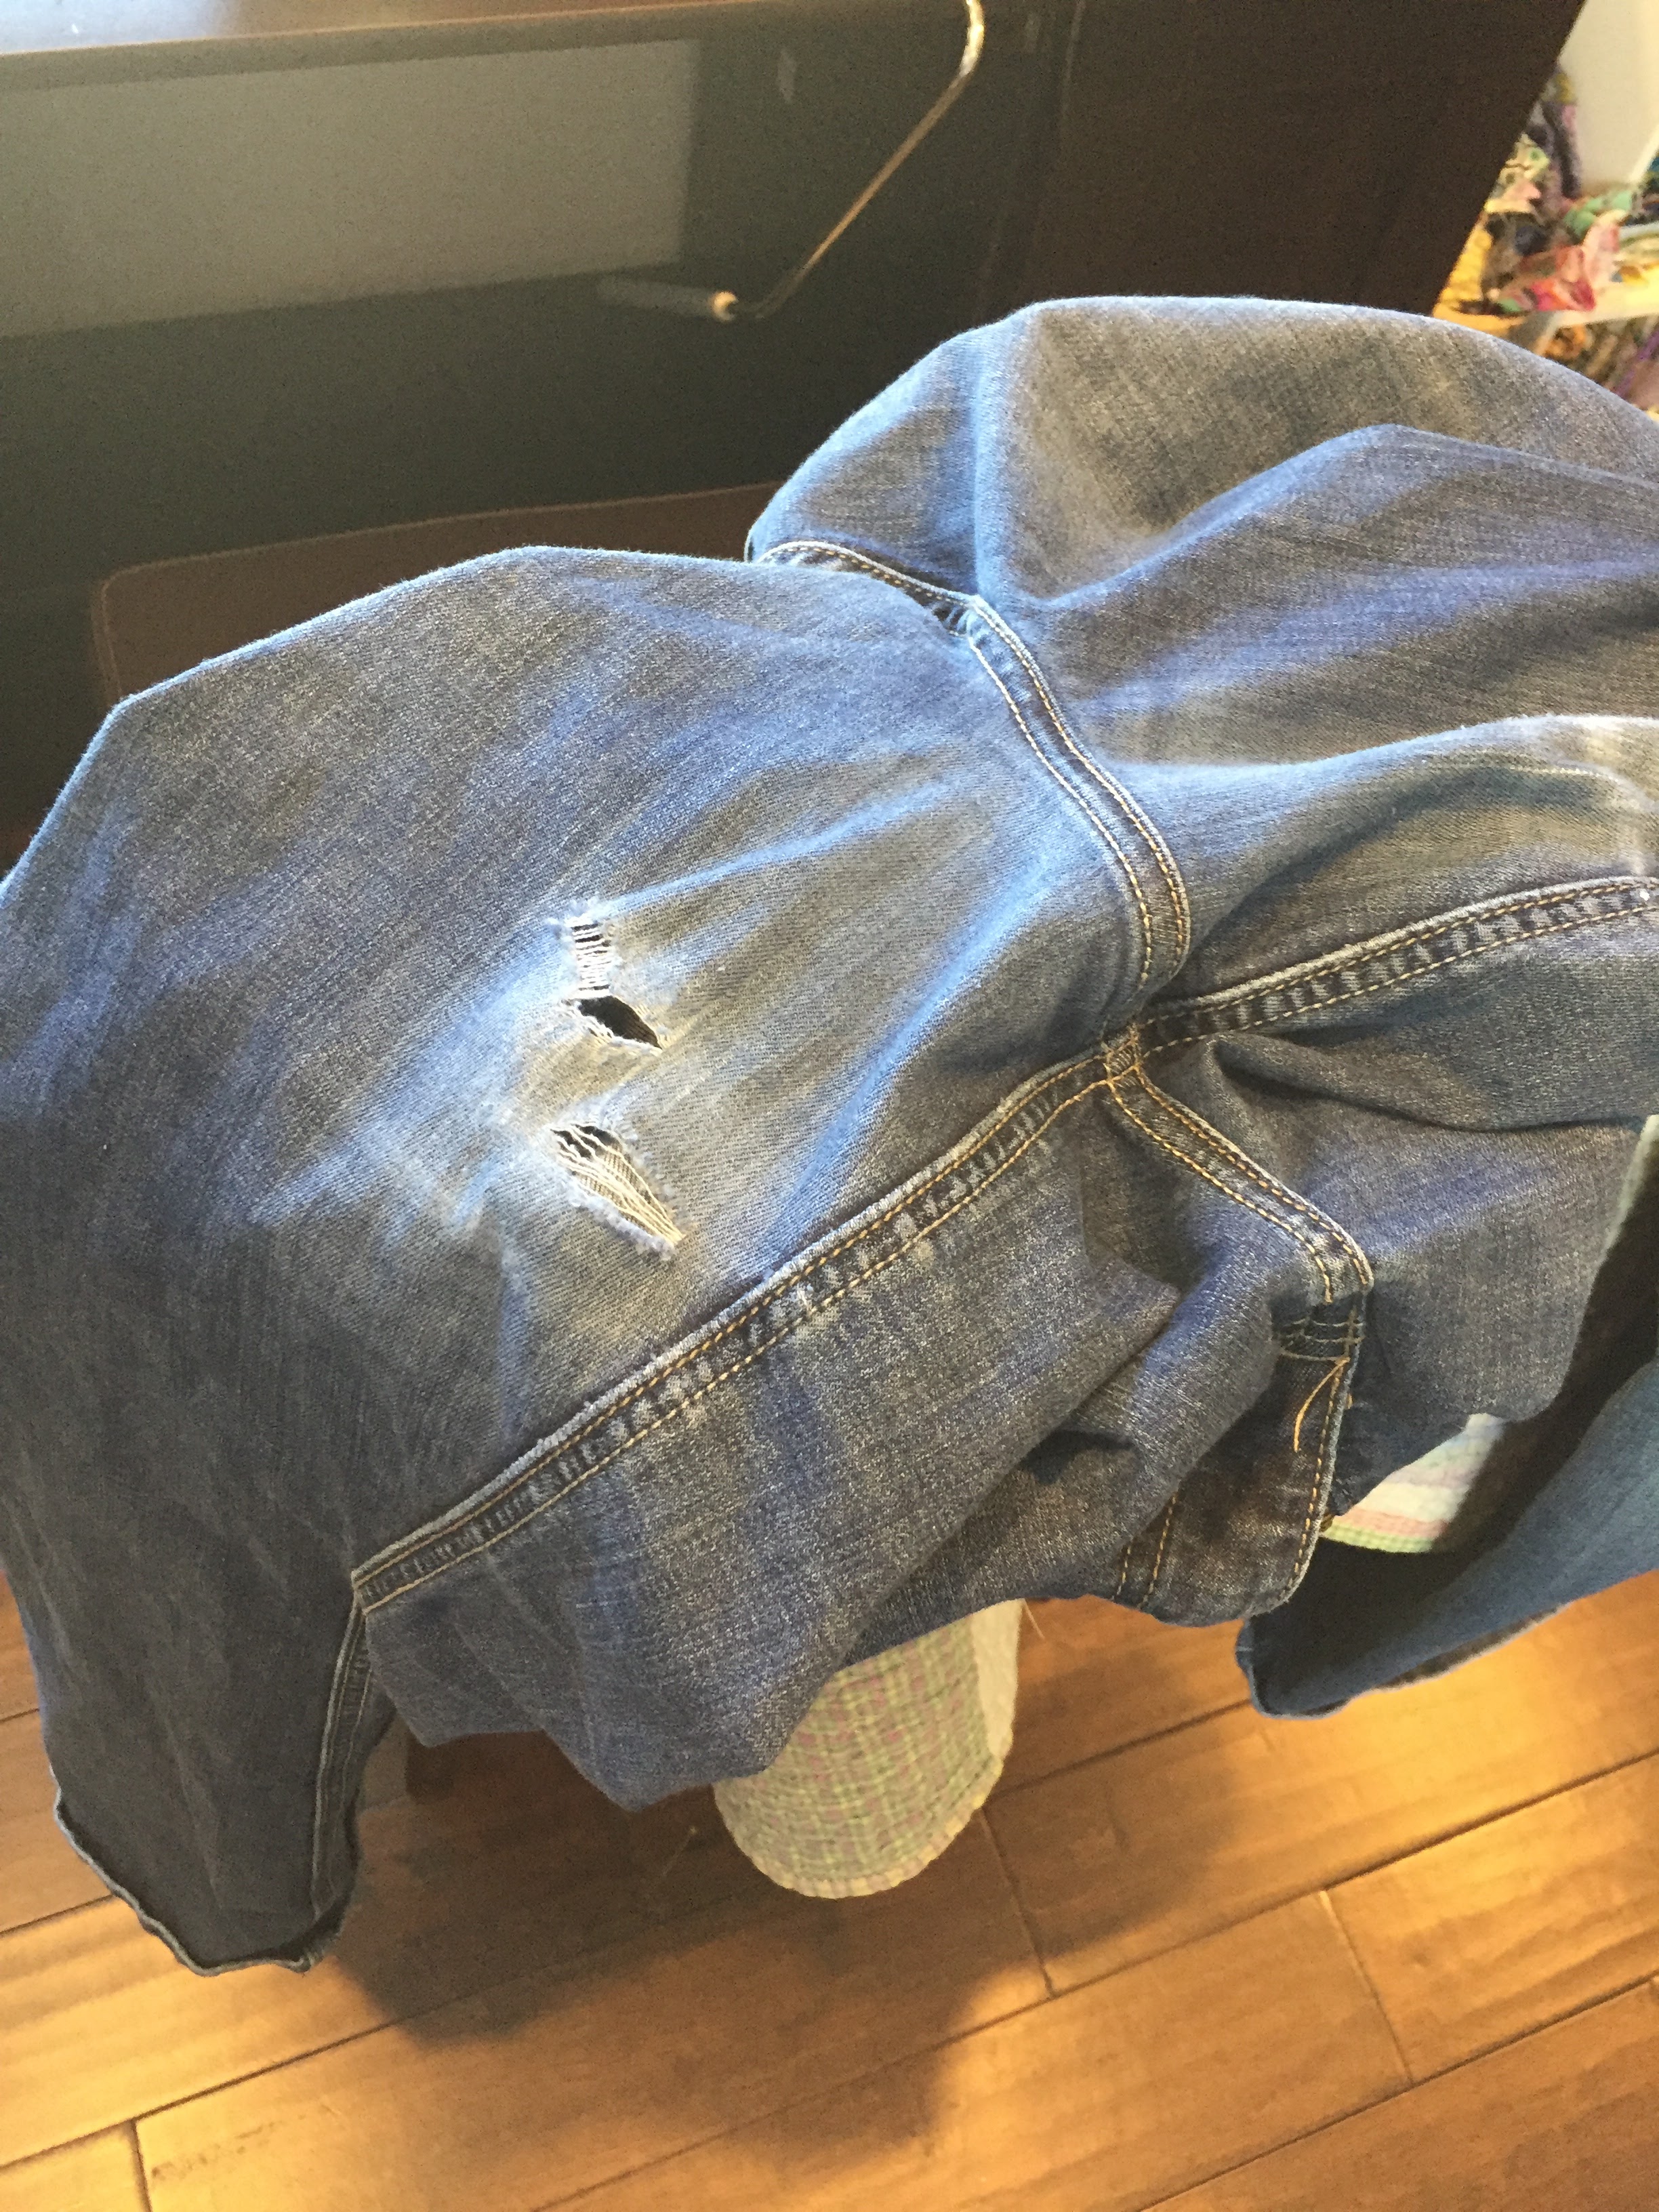 How To Prevent Chub Rub From Destroying Your Jeans